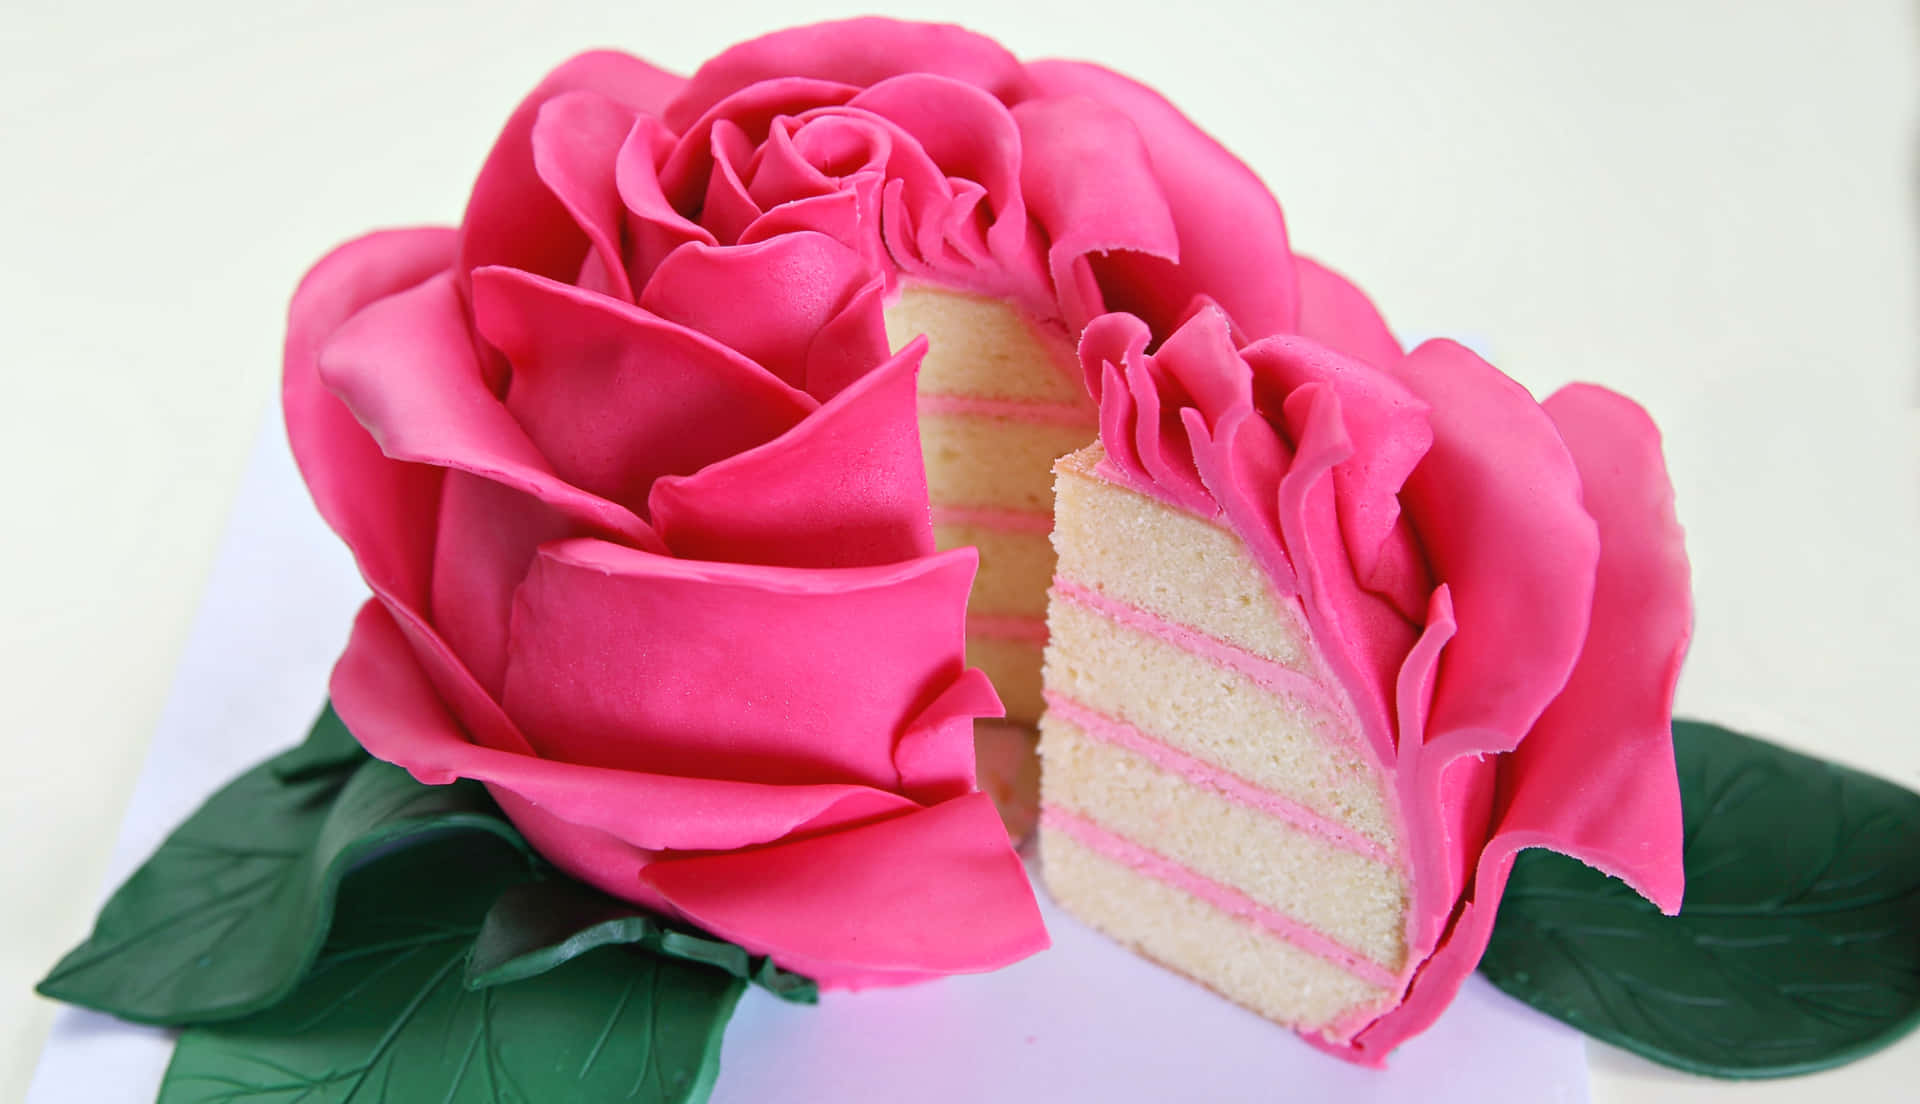 Beautiful Roses Pink Flower Cake Photography Picture